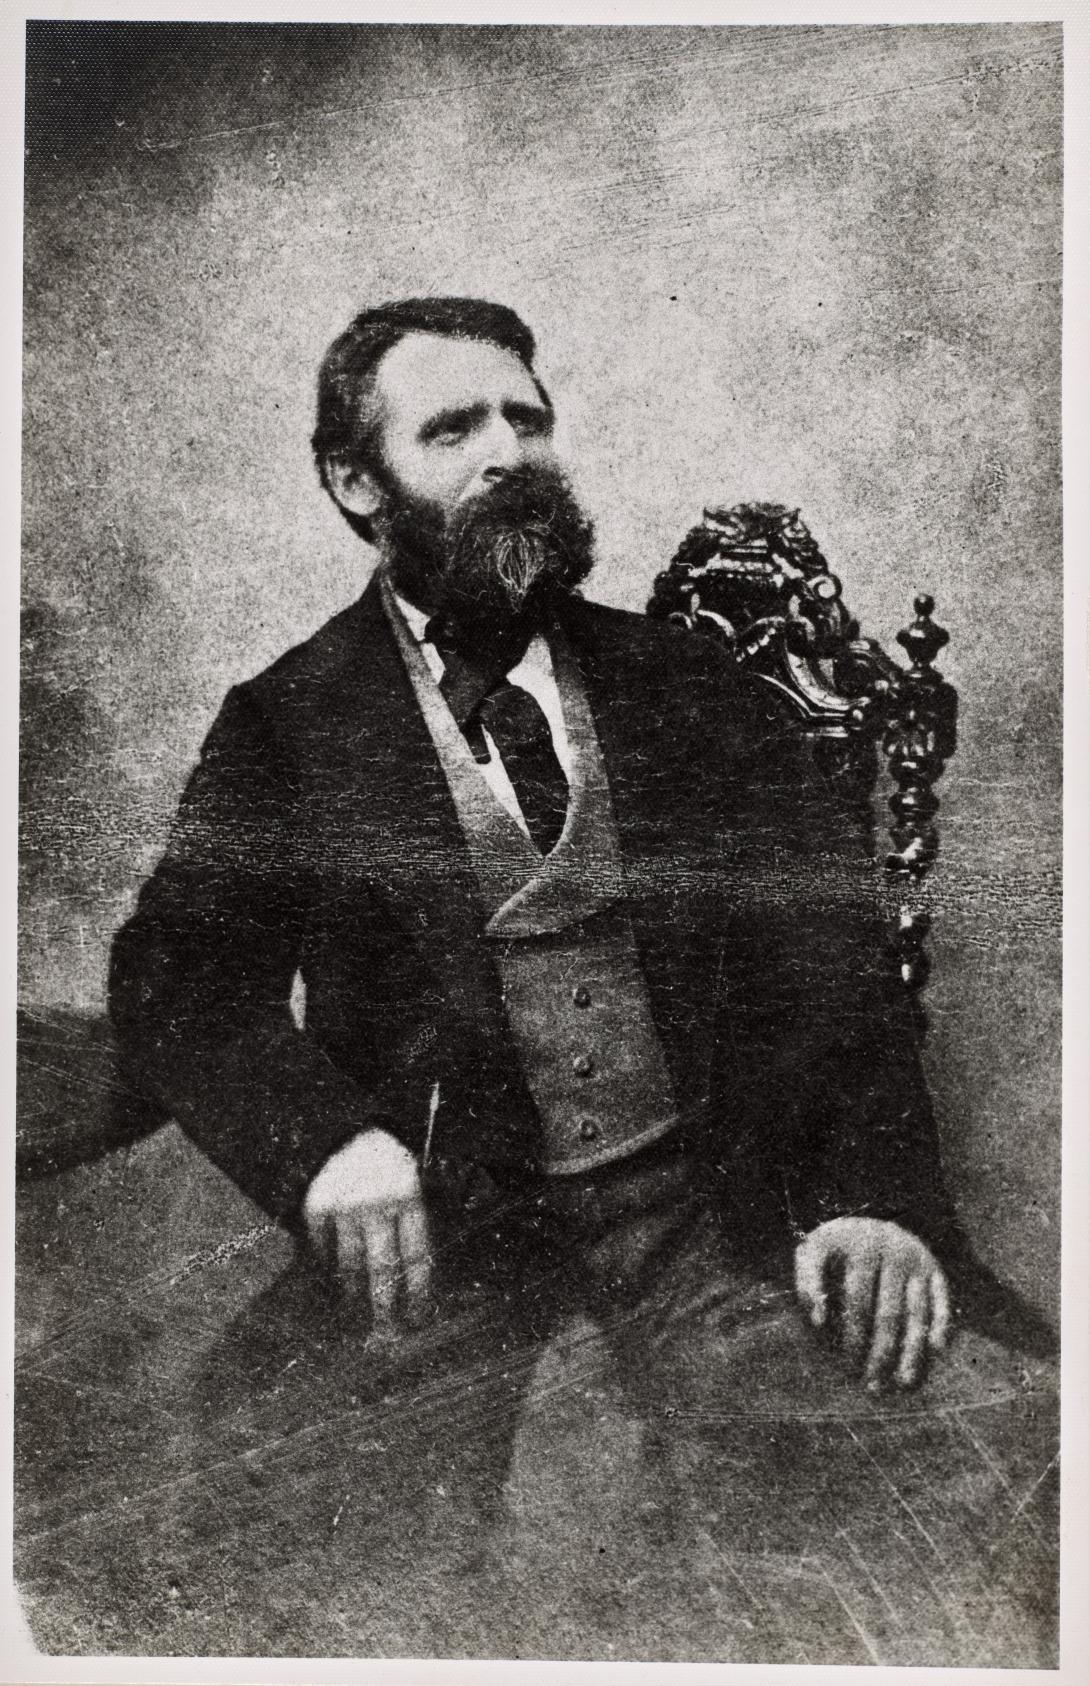 A black-and-white photograph of a man wearing a waistcoat, tie and coat, seated on an ornate chair.